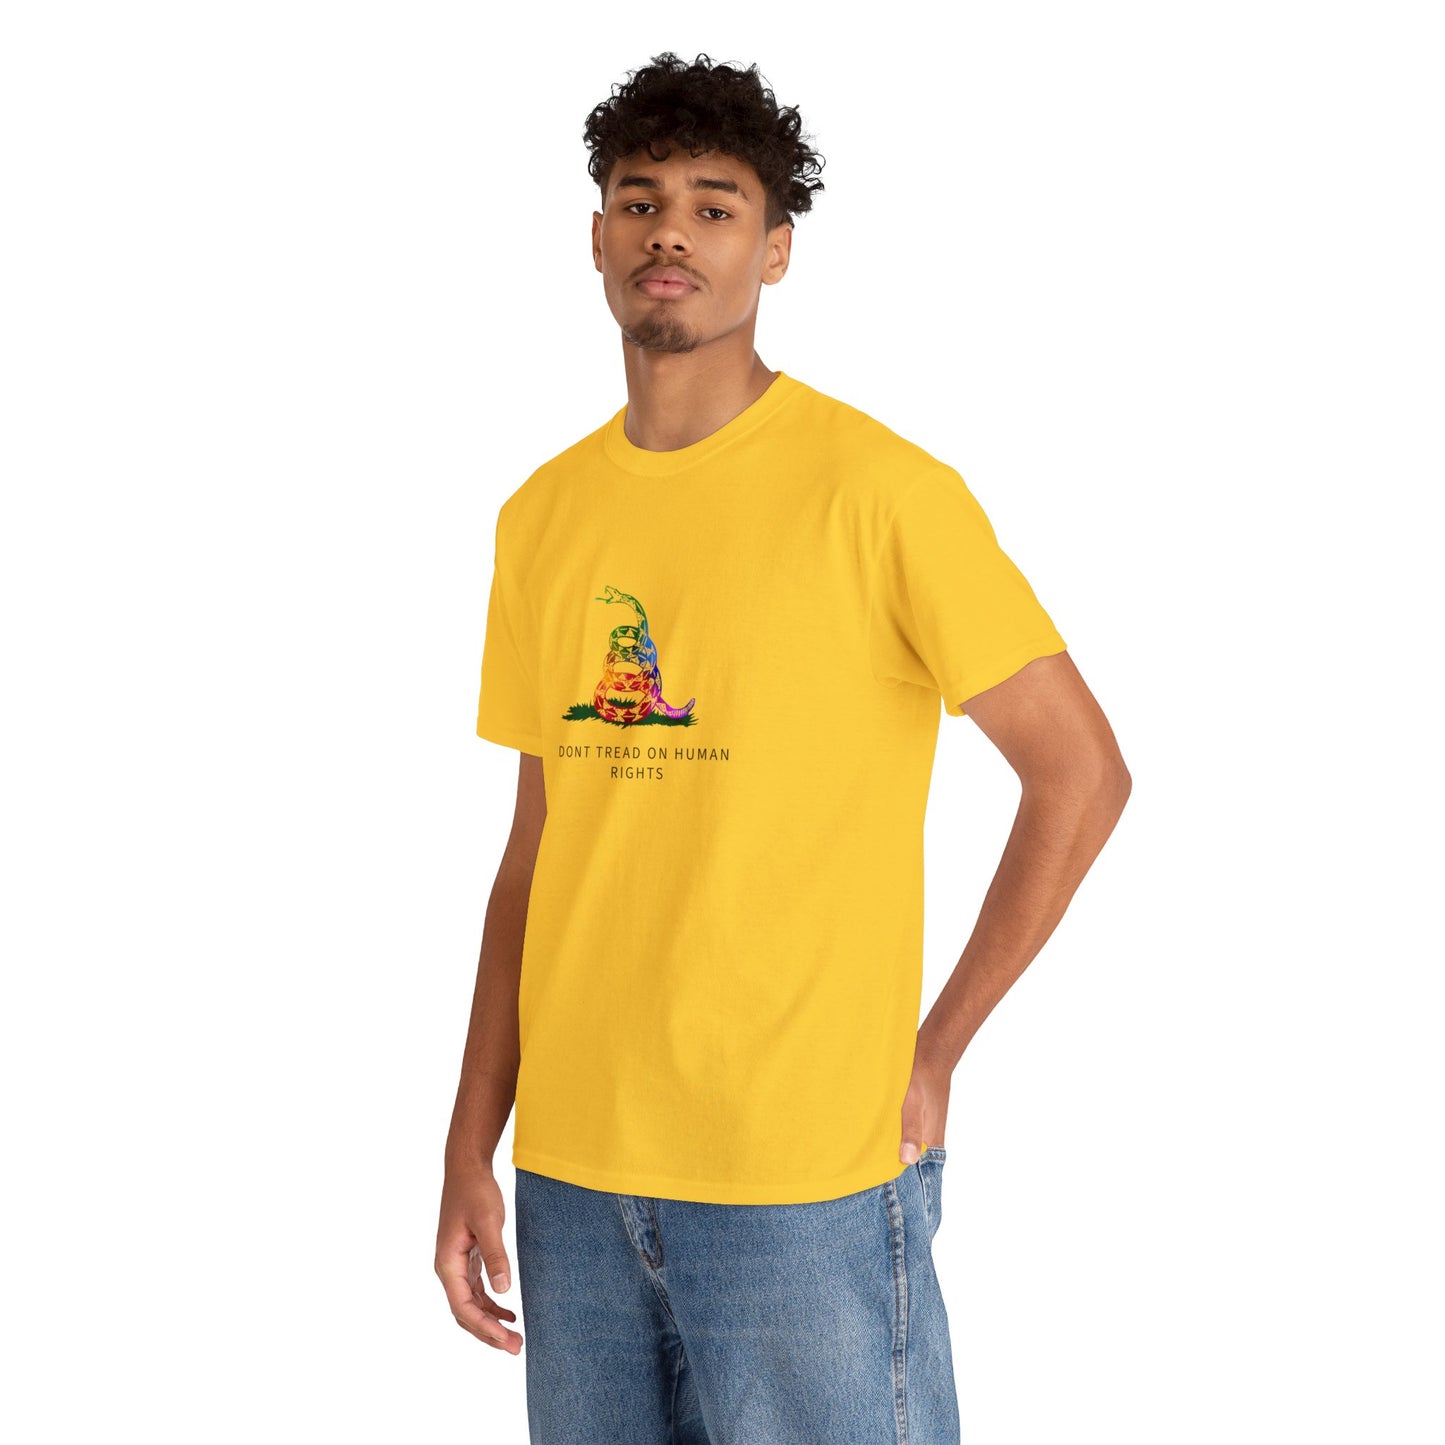 DONT TREAD ON HUMAN RIGHTS | Gadsden Graphic T-shirt